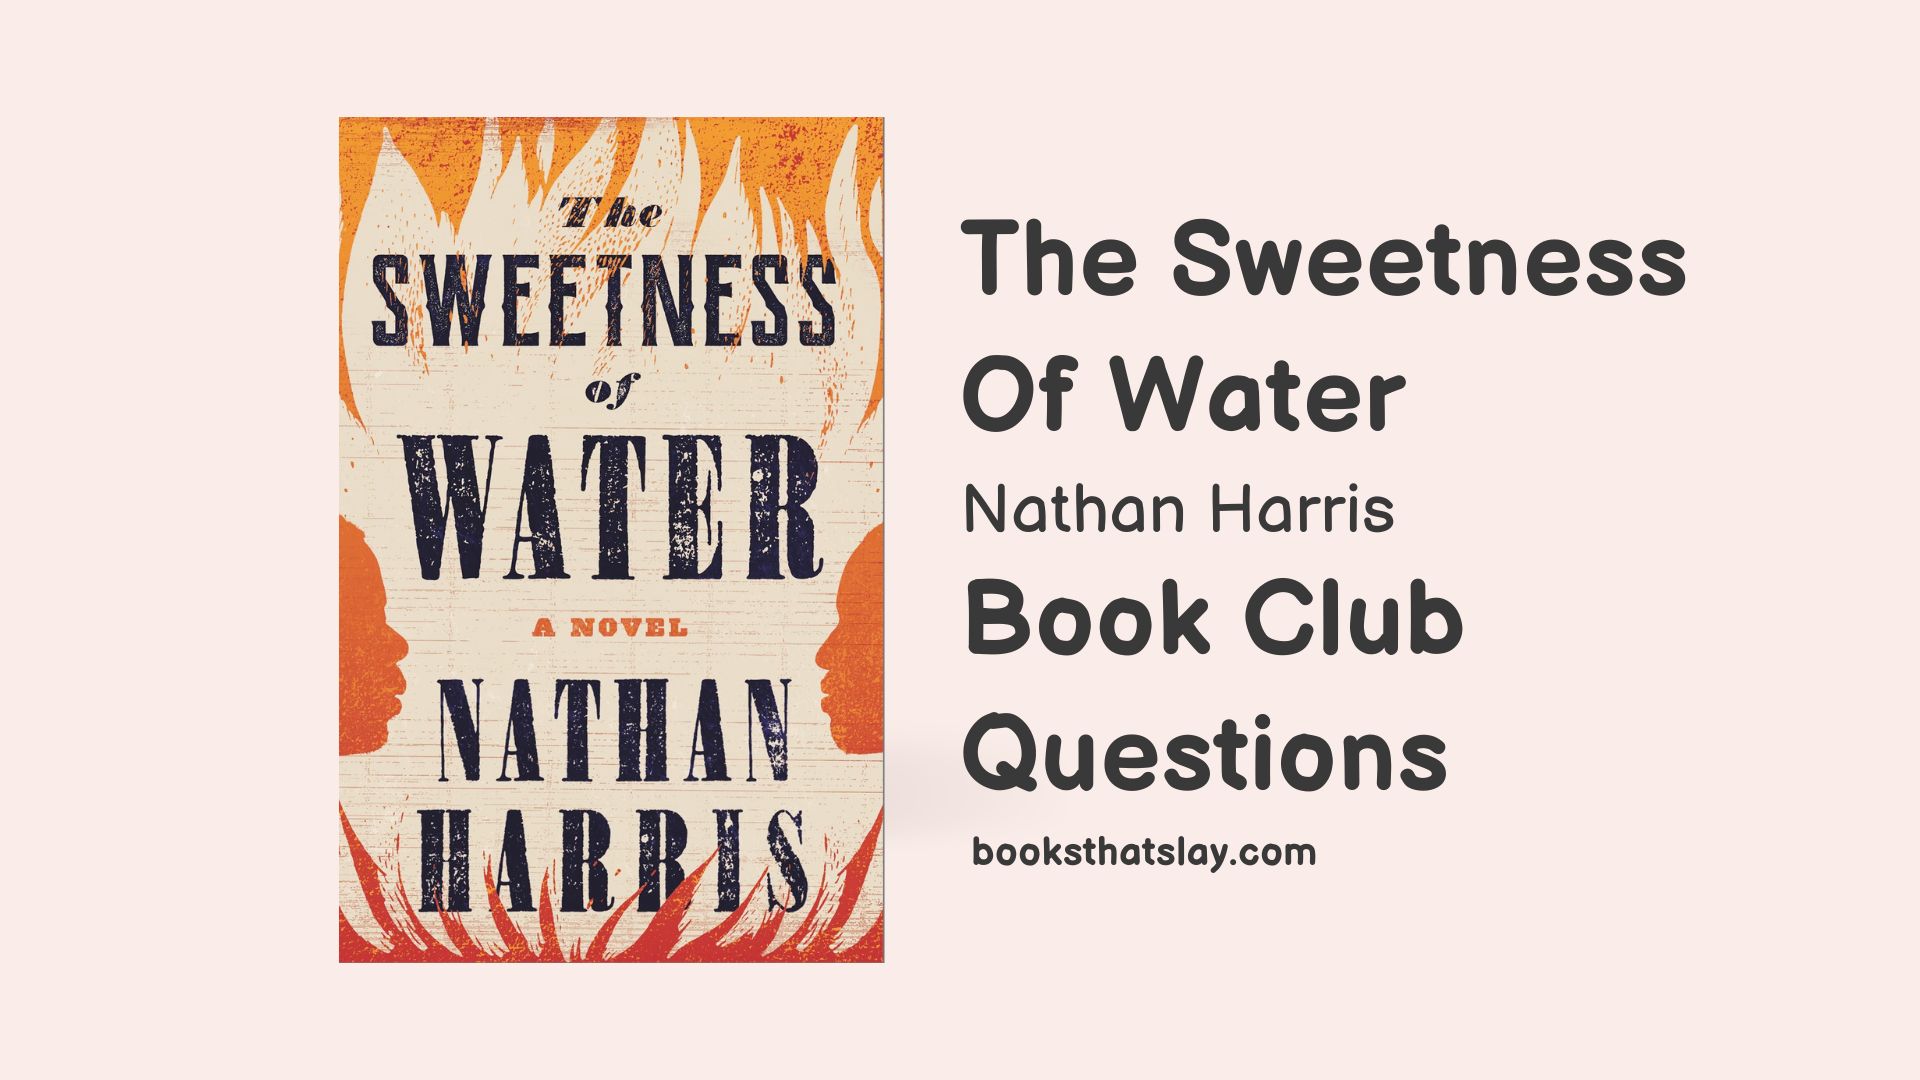 Nathan Harris and The Sweetness of Water